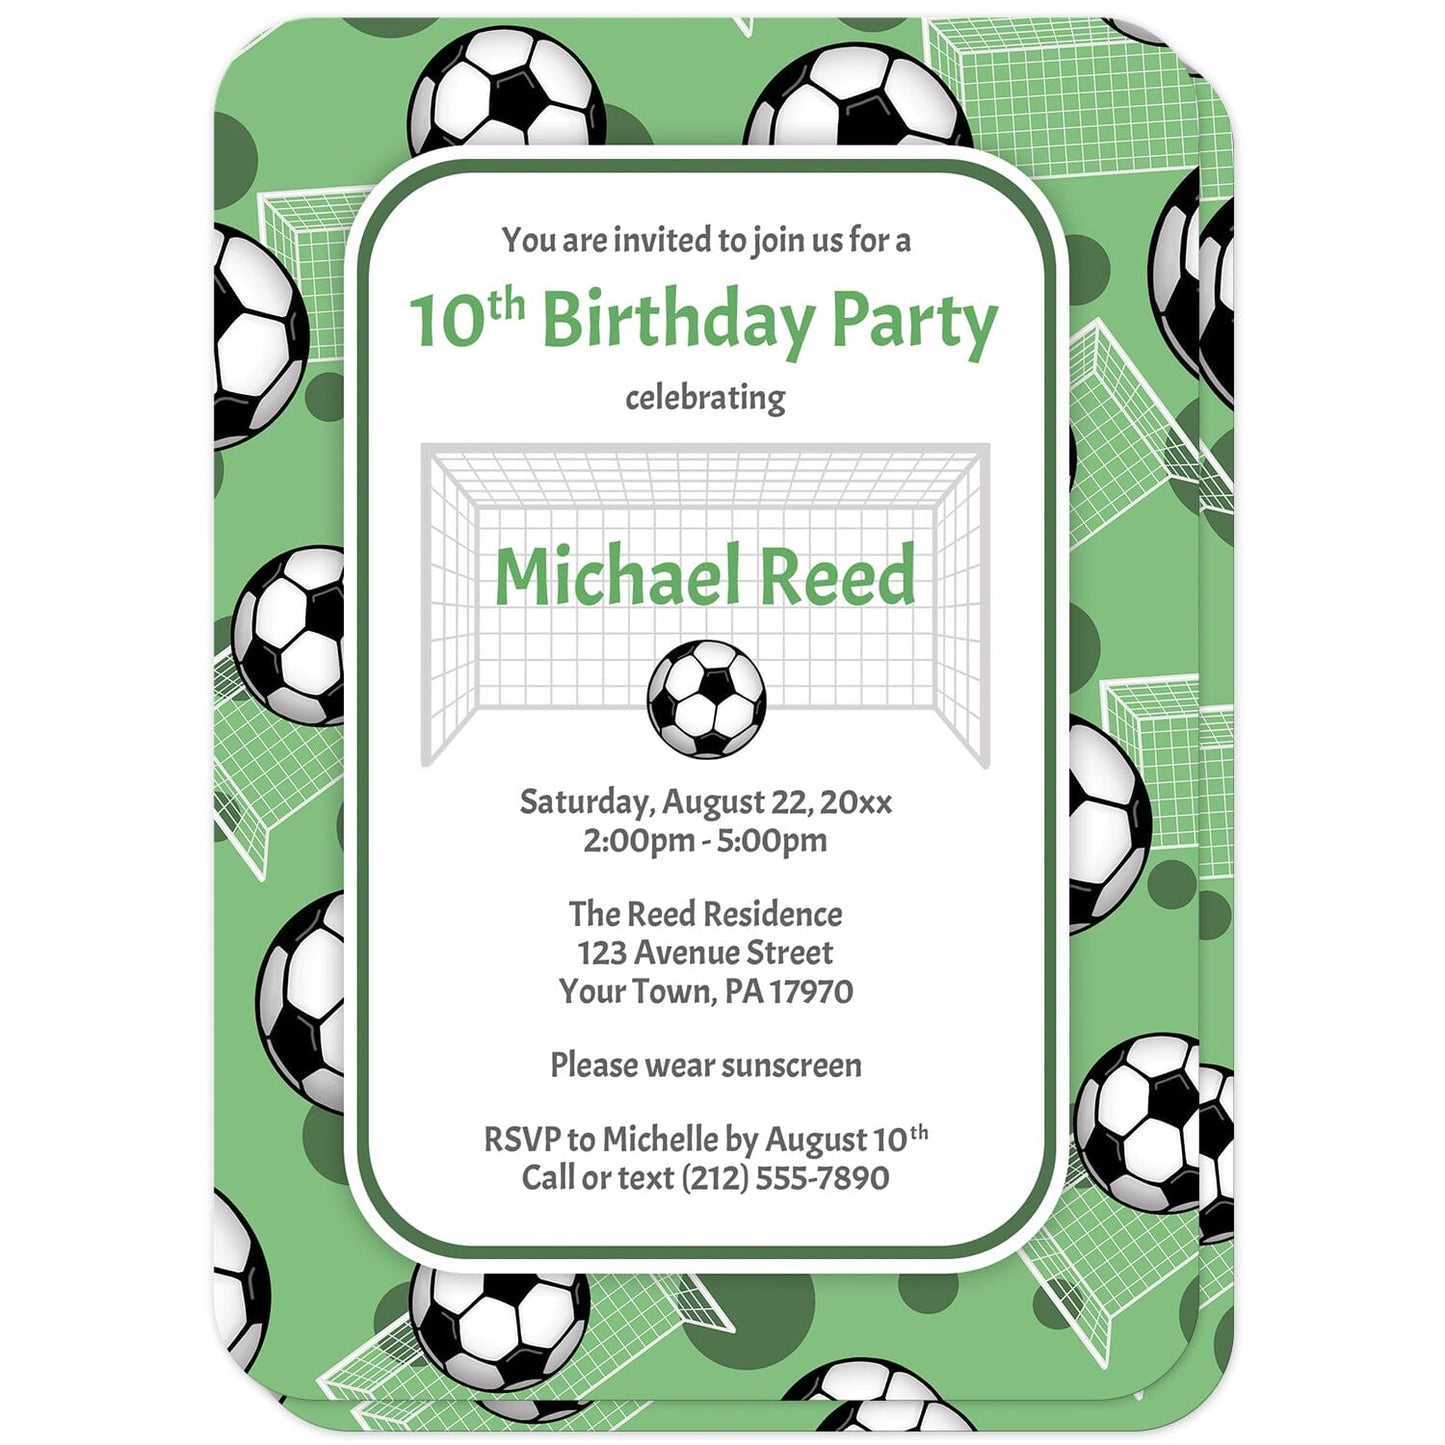 Soccer Ball and Goal Green Birthday Party Invitations (with rounded corners) at Artistically Invited. Sports-themed soccer ball and goal green birthday party invitations for any age or milestone that are uniquely illustrated with a pattern of soccer balls and soccer goals over a green background color. Your personalized birthday party details are custom printed in green and gray over white in the center over the soccer pattern.